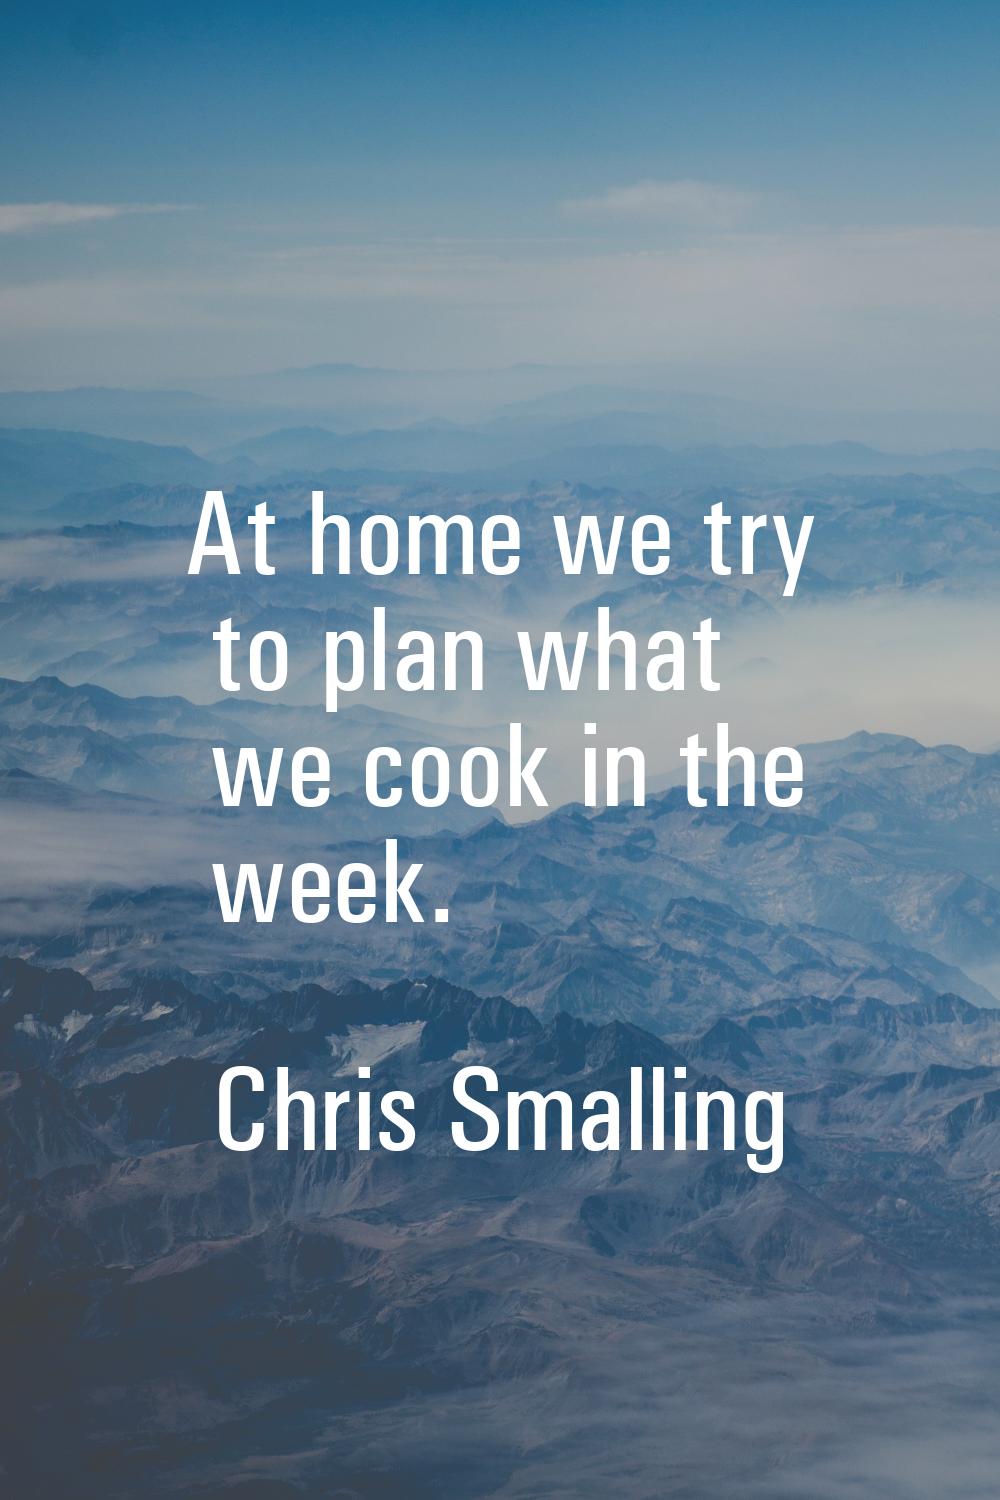 At home we try to plan what we cook in the week.